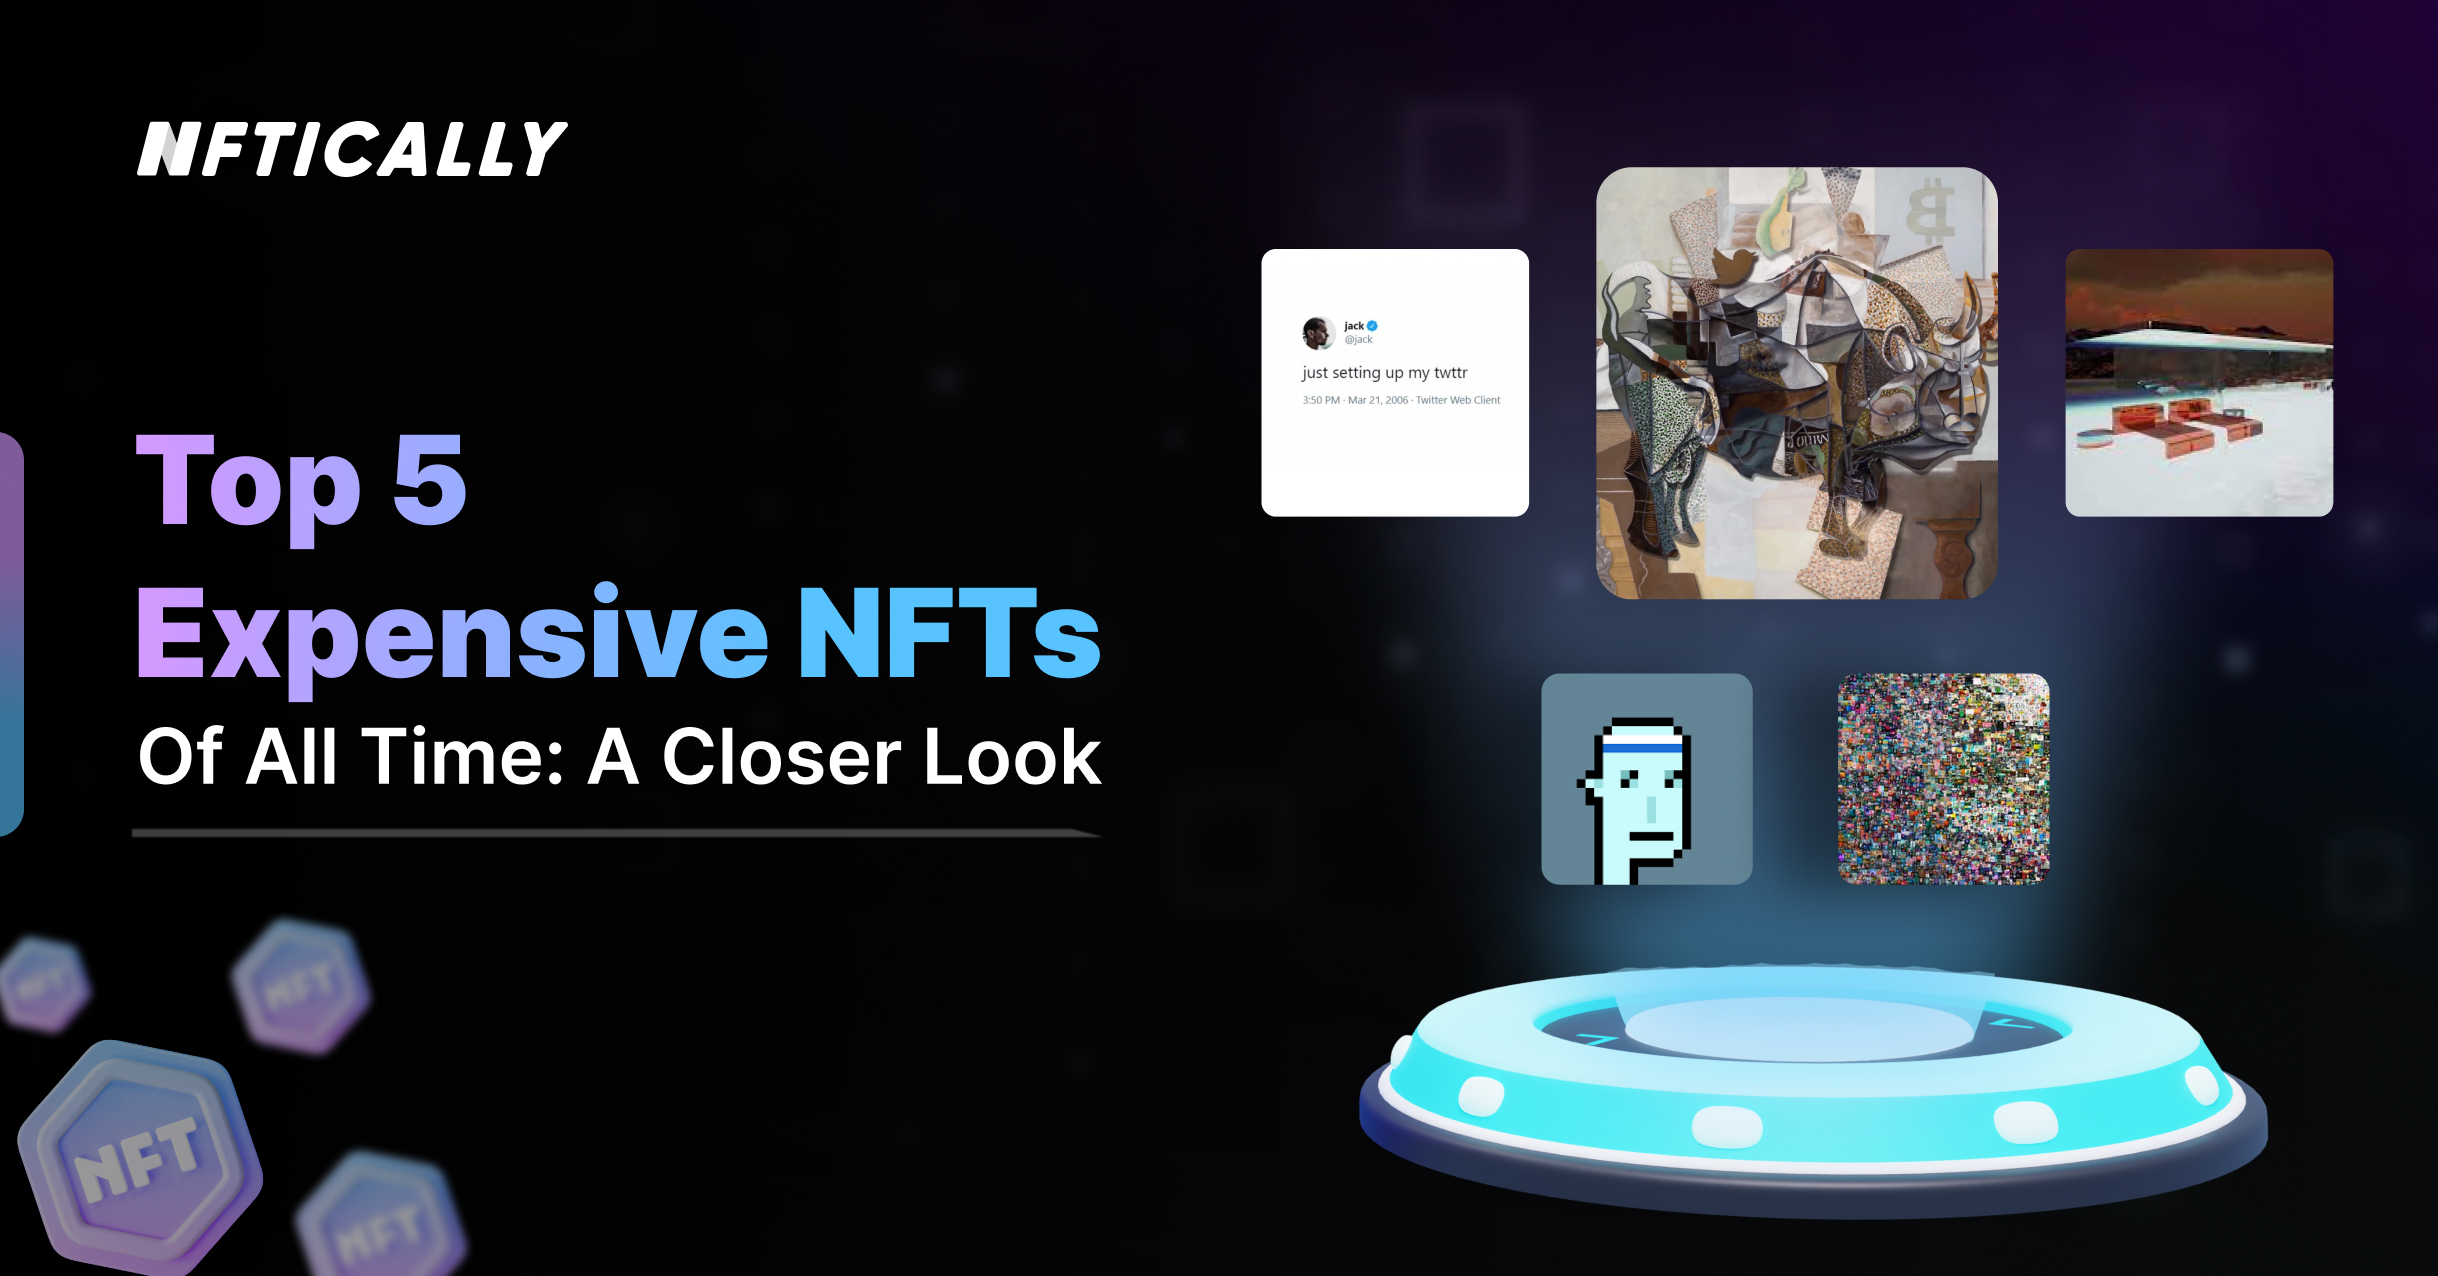 Top 5 Expensive NFTs of All Time: A Closer Look - NFTICALLY